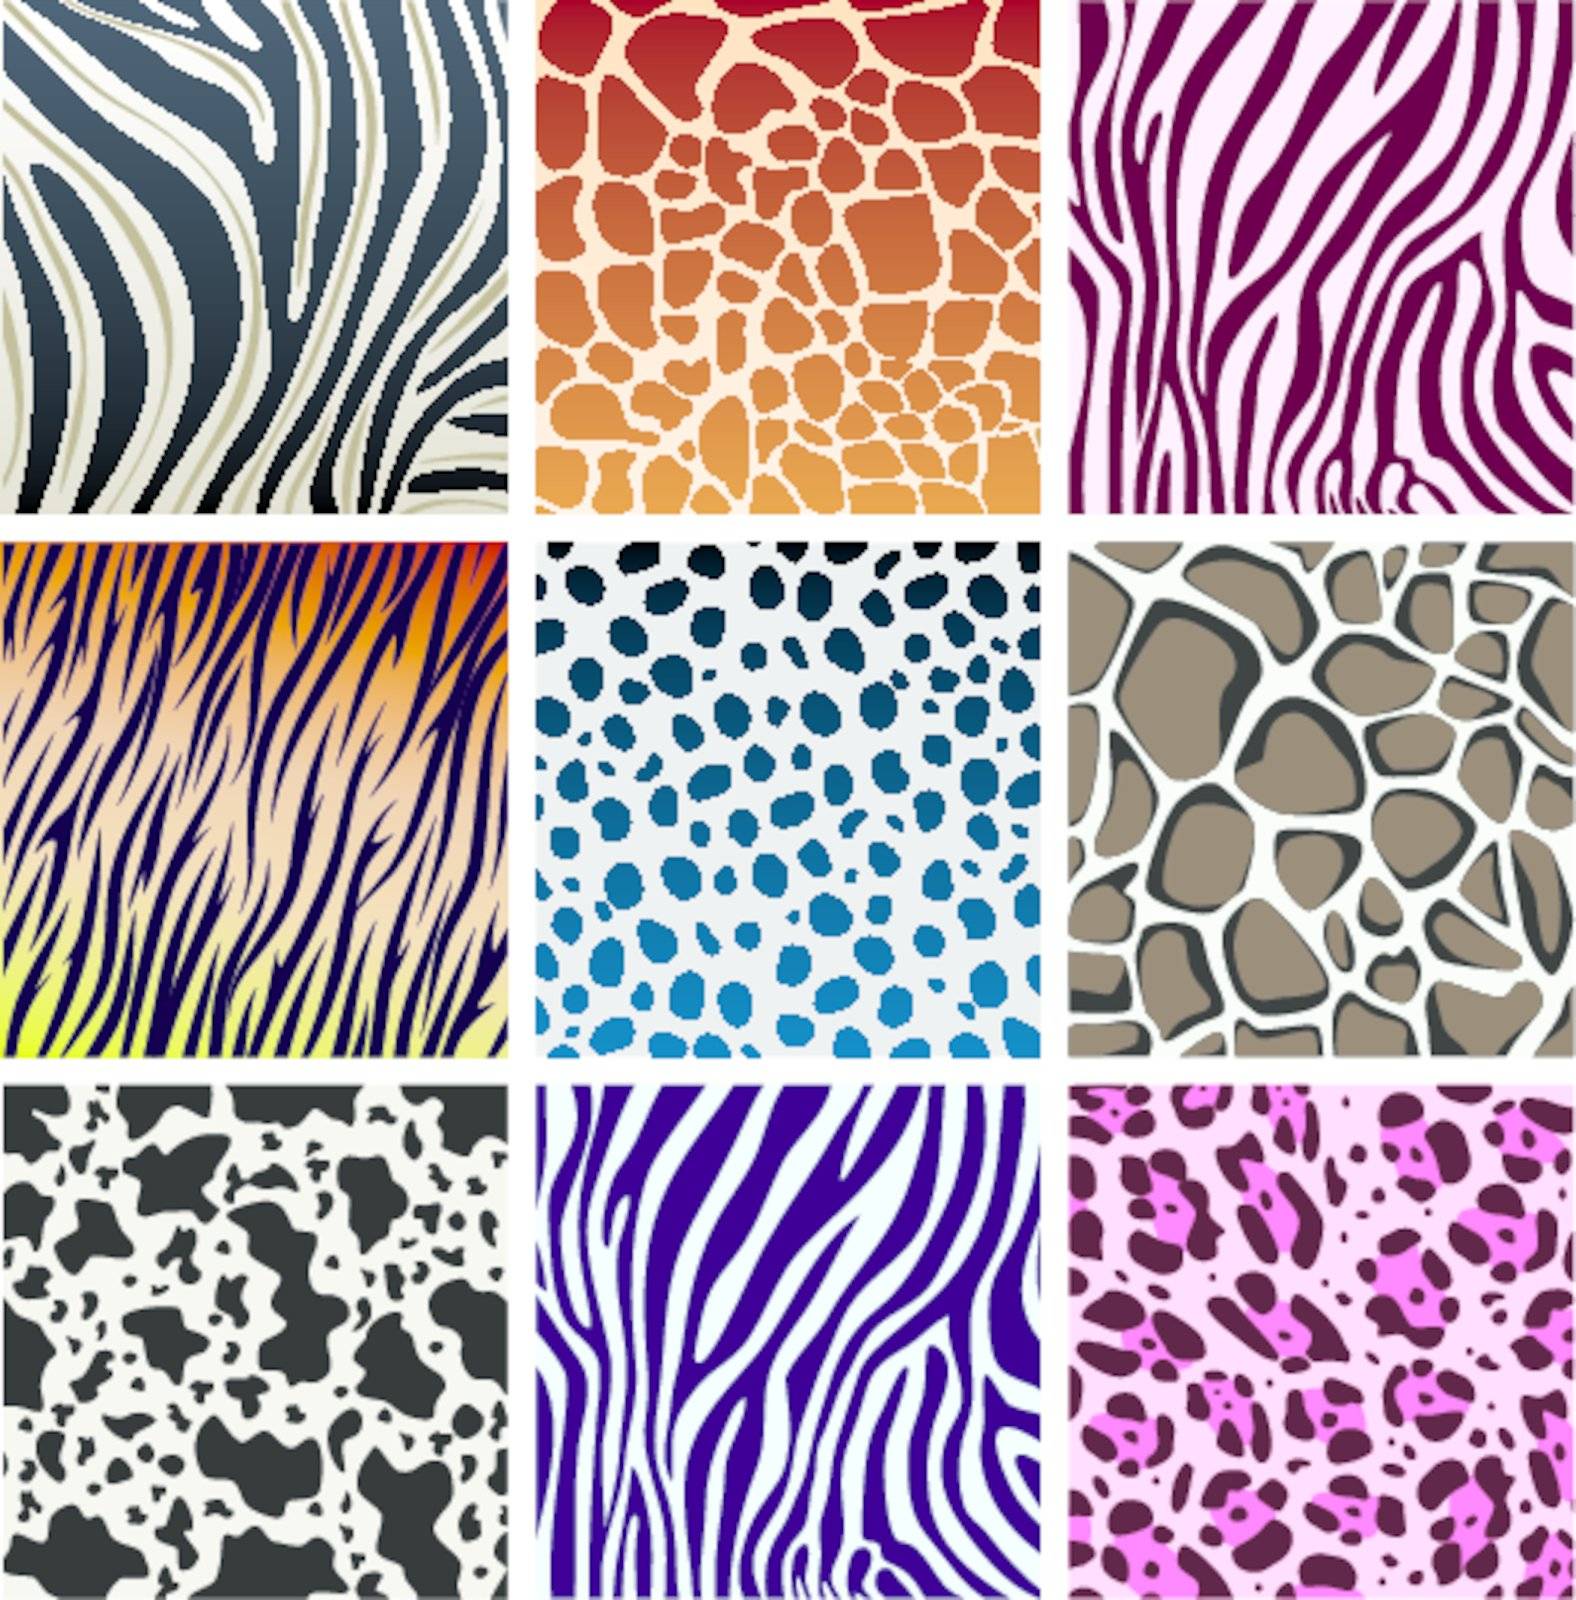 animal skin textures by freesoulproduction